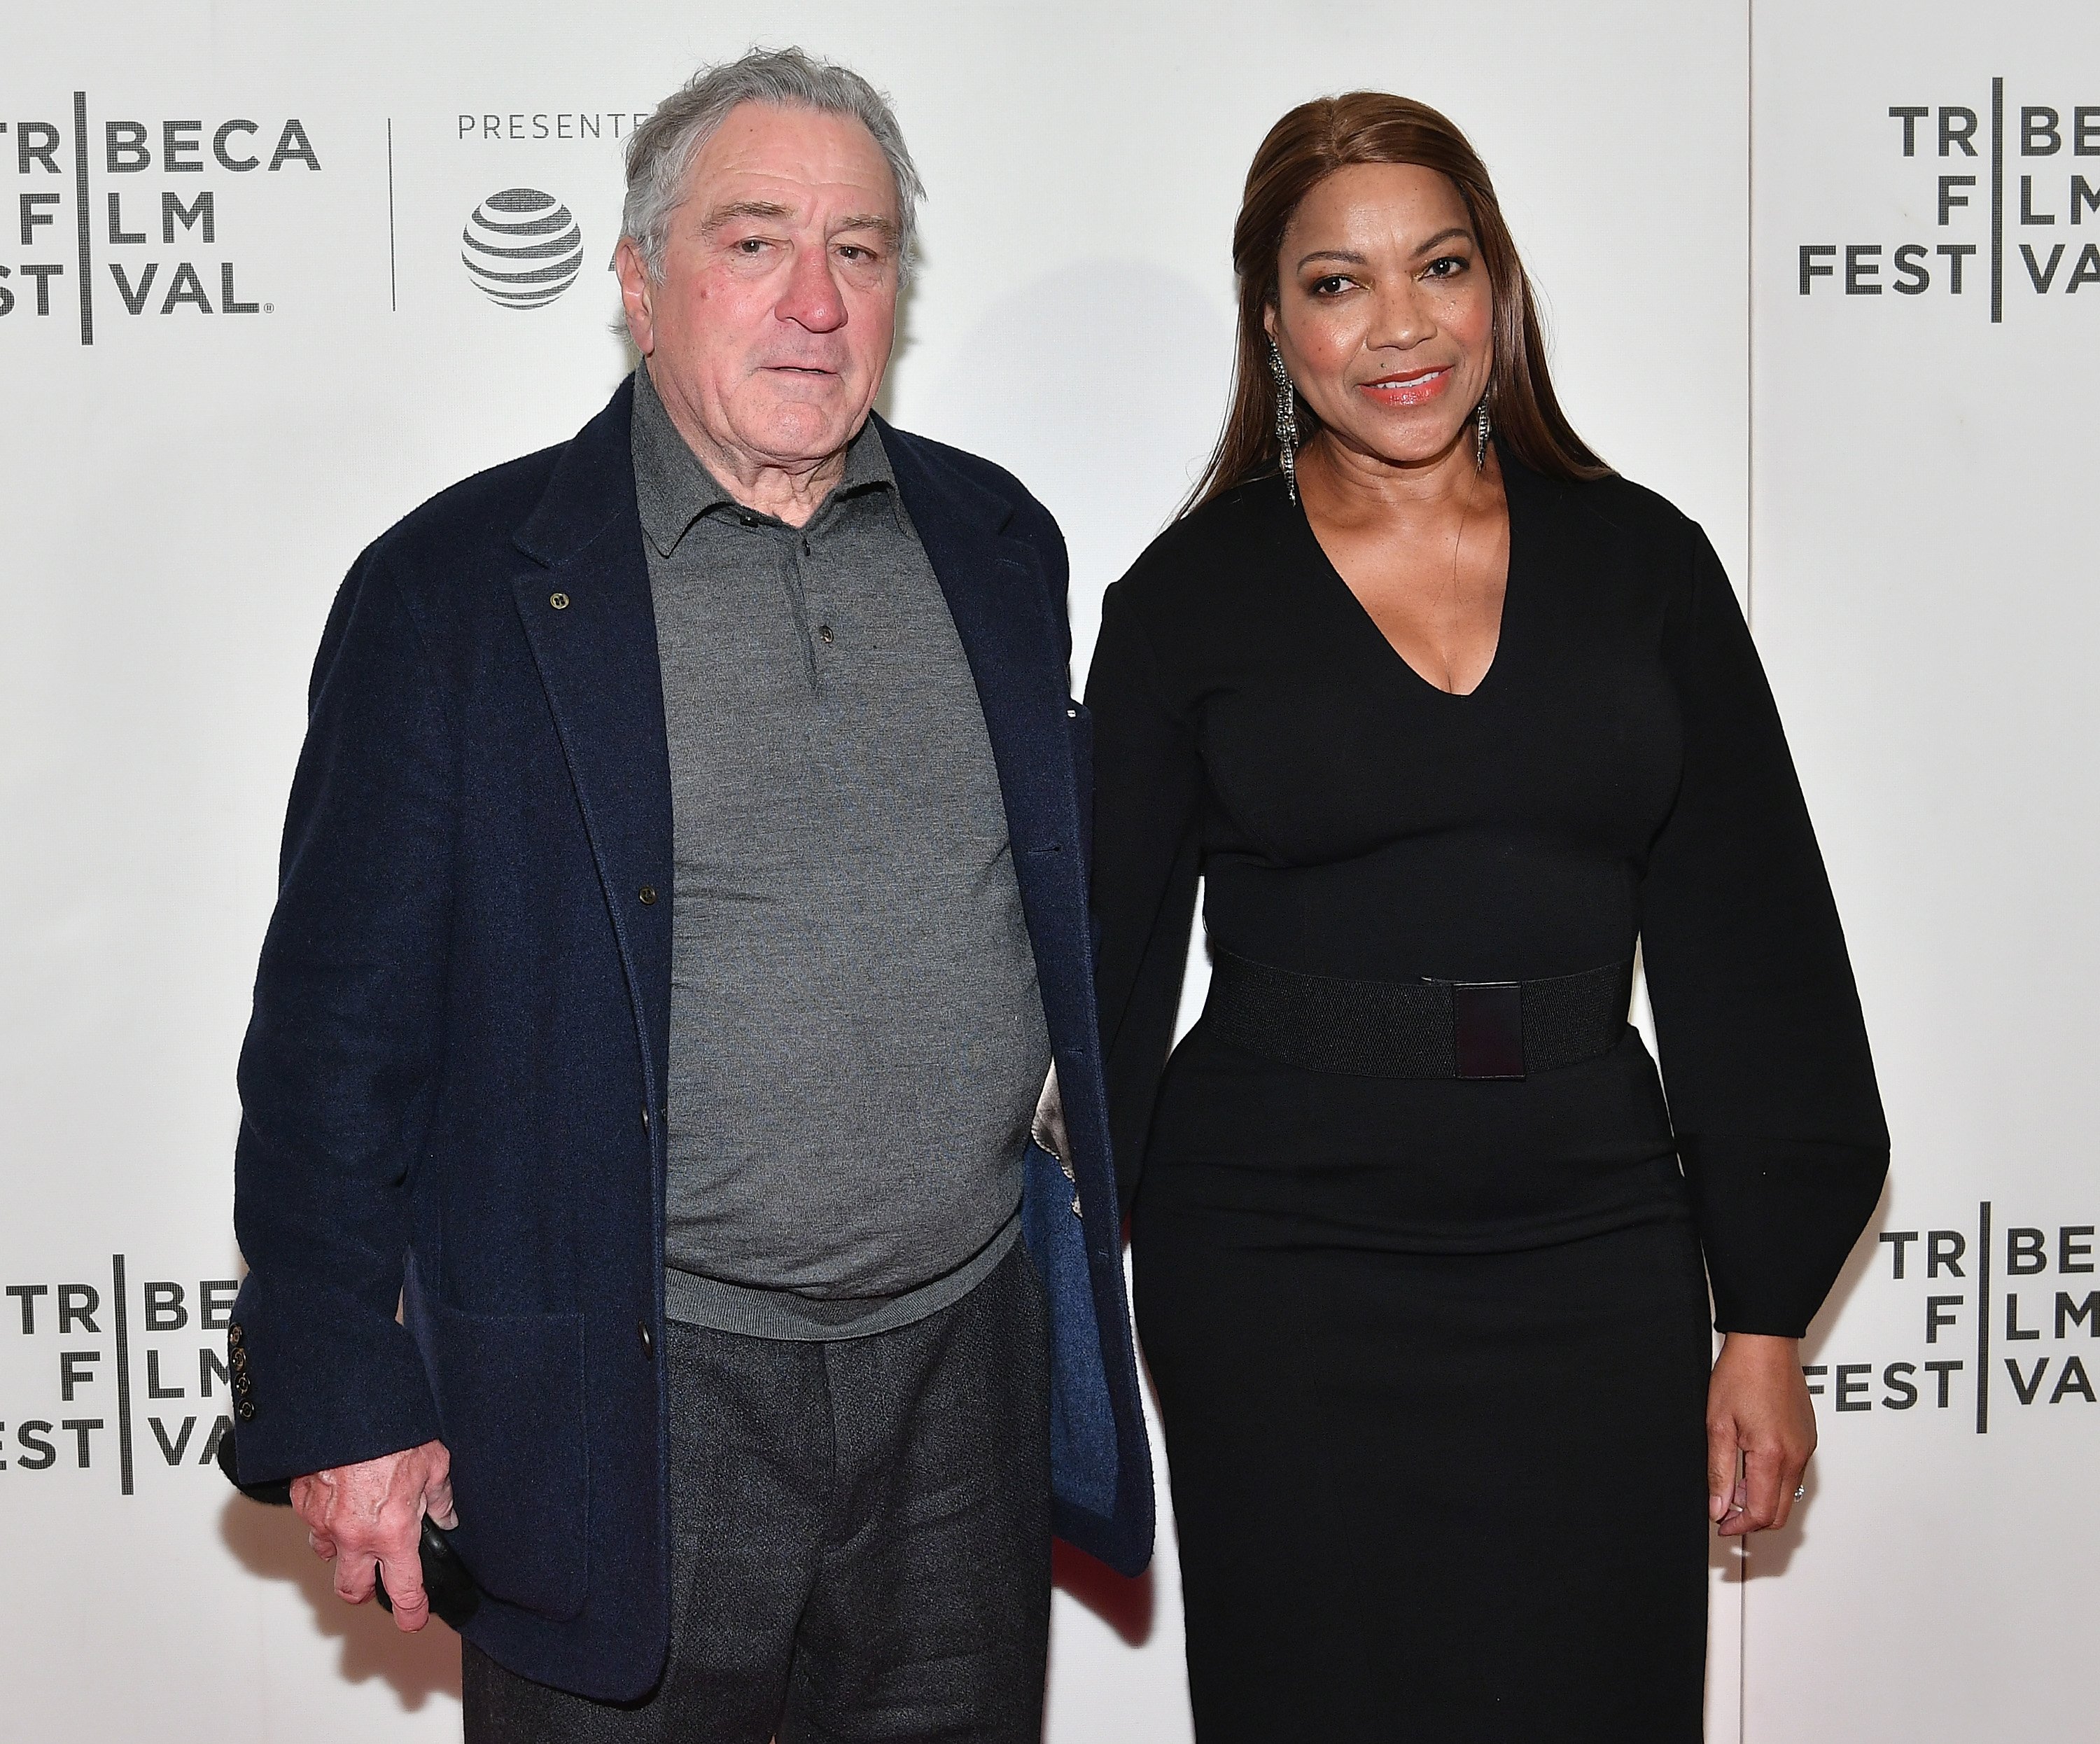 Robert De Niro and Grace Hightower attend the "Rest In Power: The Trayvon Martin Story" premiere during the 2018 Tribeca Film Festival at BMCC Tribeca PAC on April 20, 2018 in New York City | Source: Getty Images